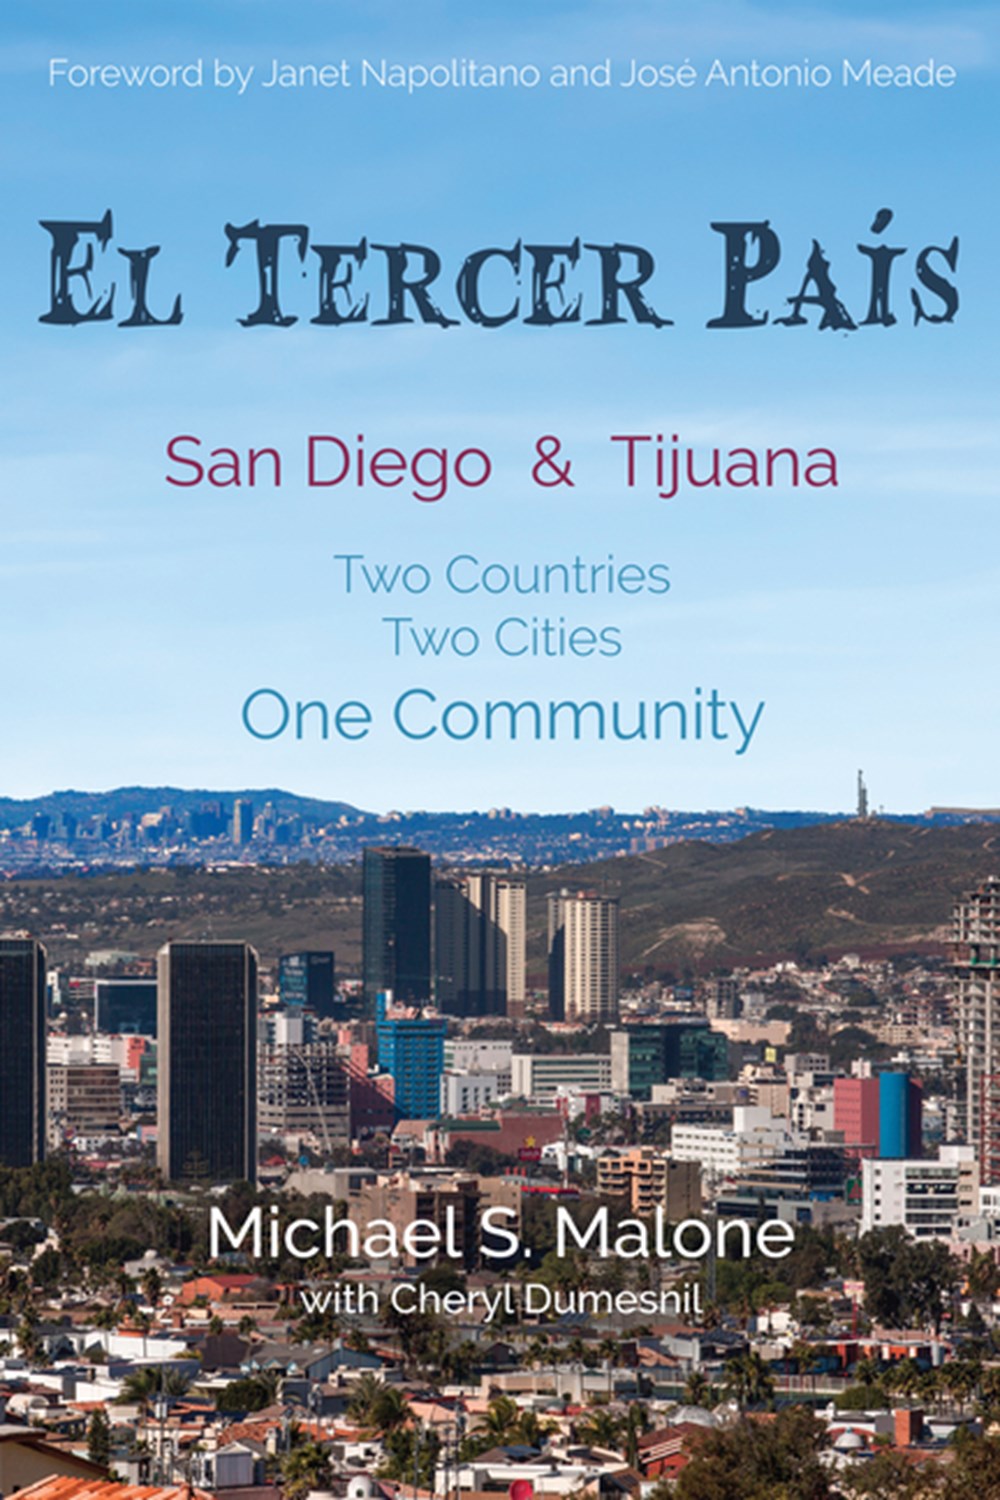 El Tercer País: San Diego & Tijuana: Two Countries, Two Cities, One Community